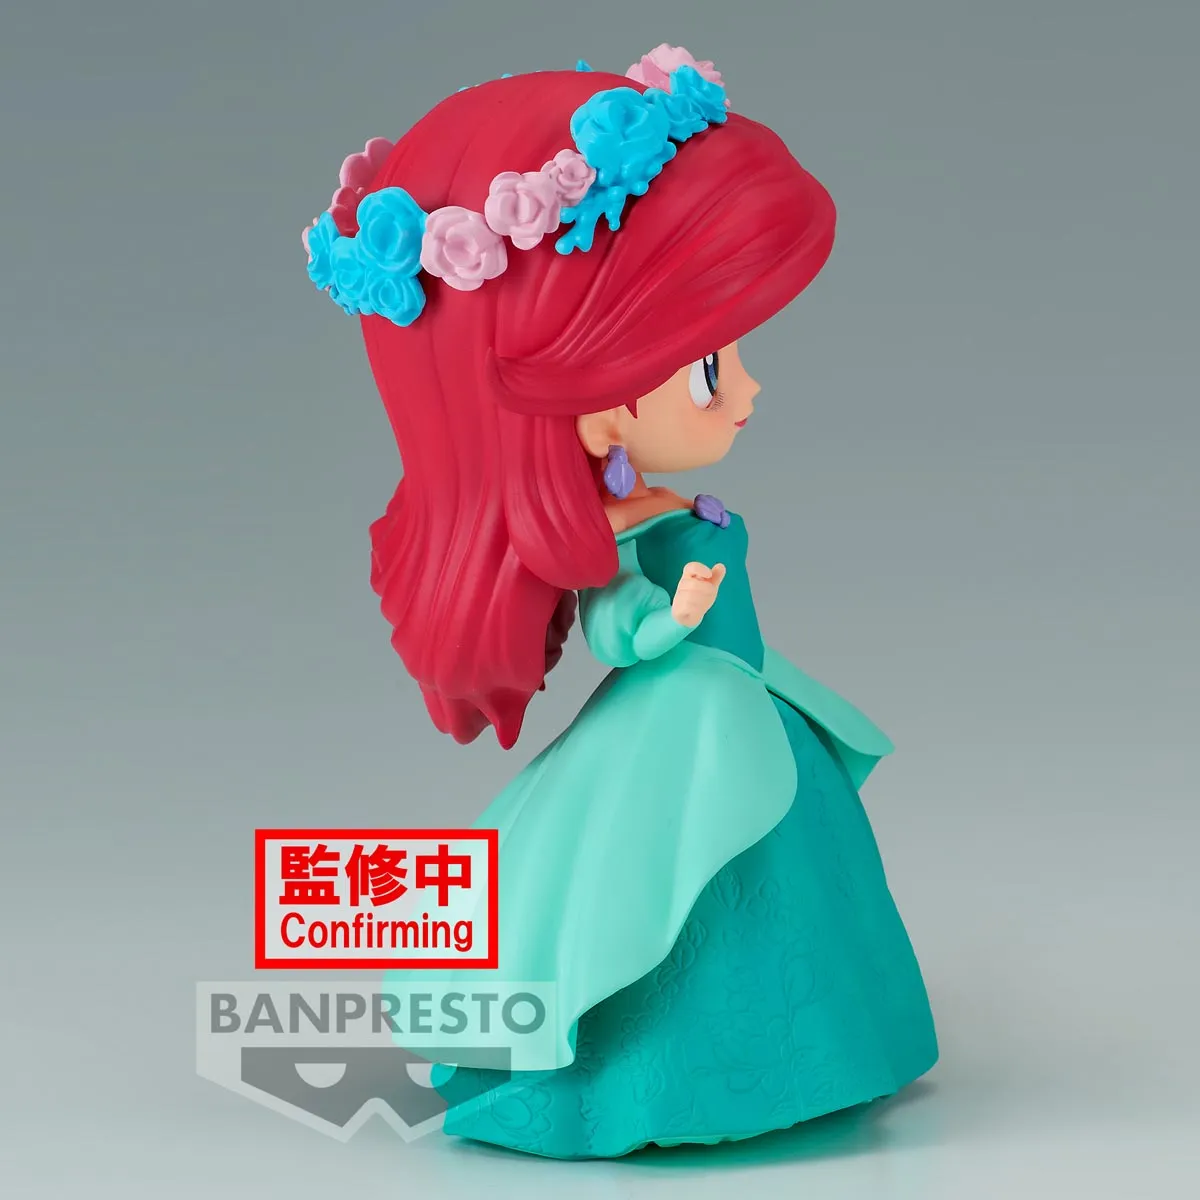 Pre-Order Flower Style - Ariel (ver. A) "Disney Characters"